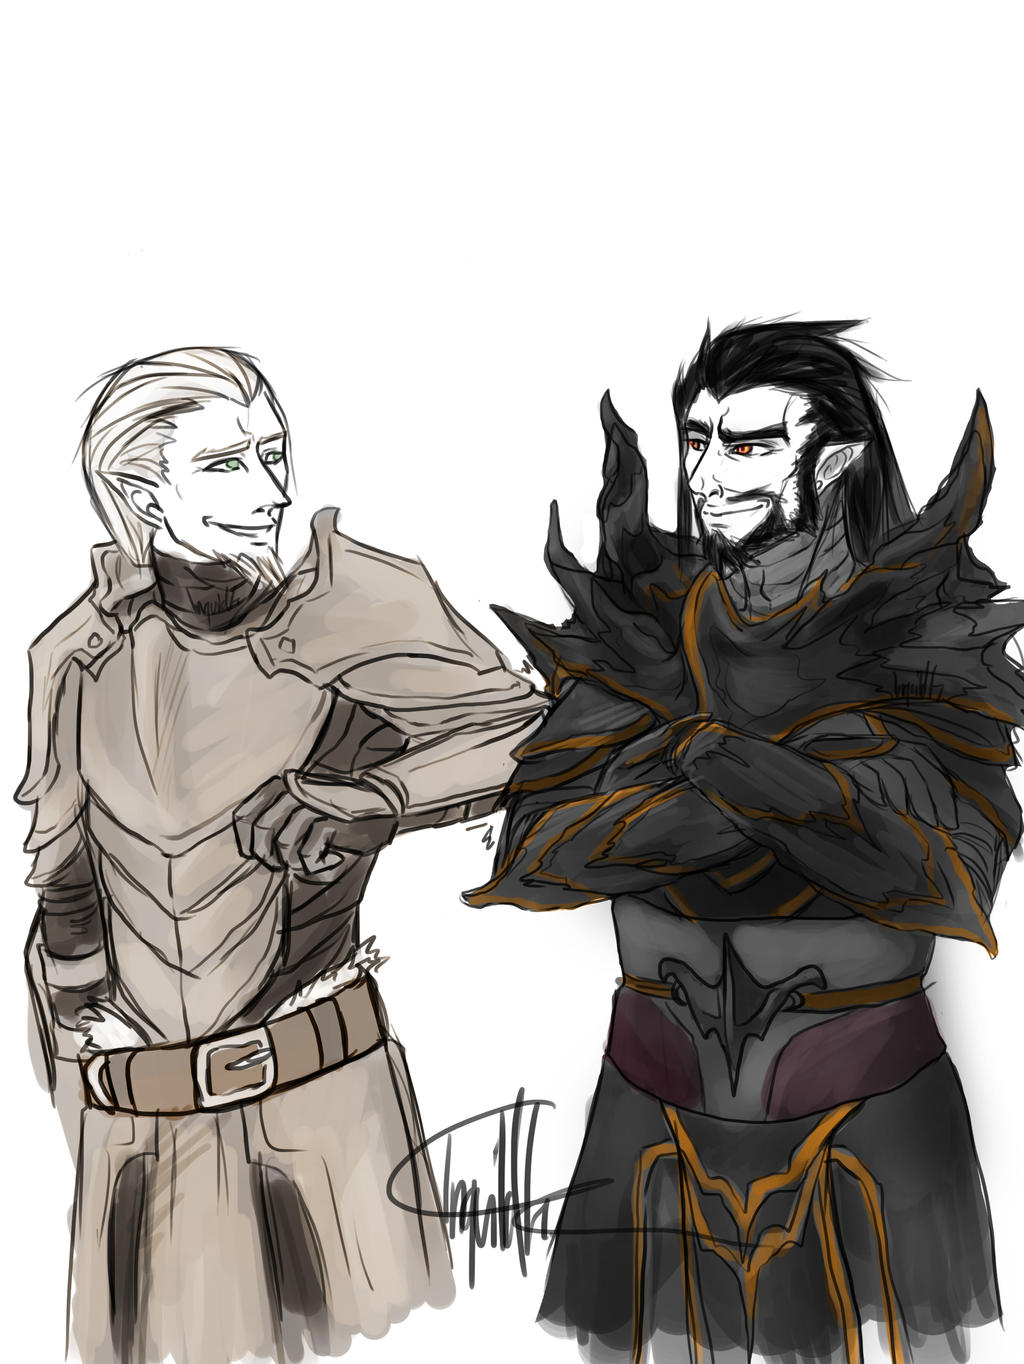 We were brothers once, Alduin and I